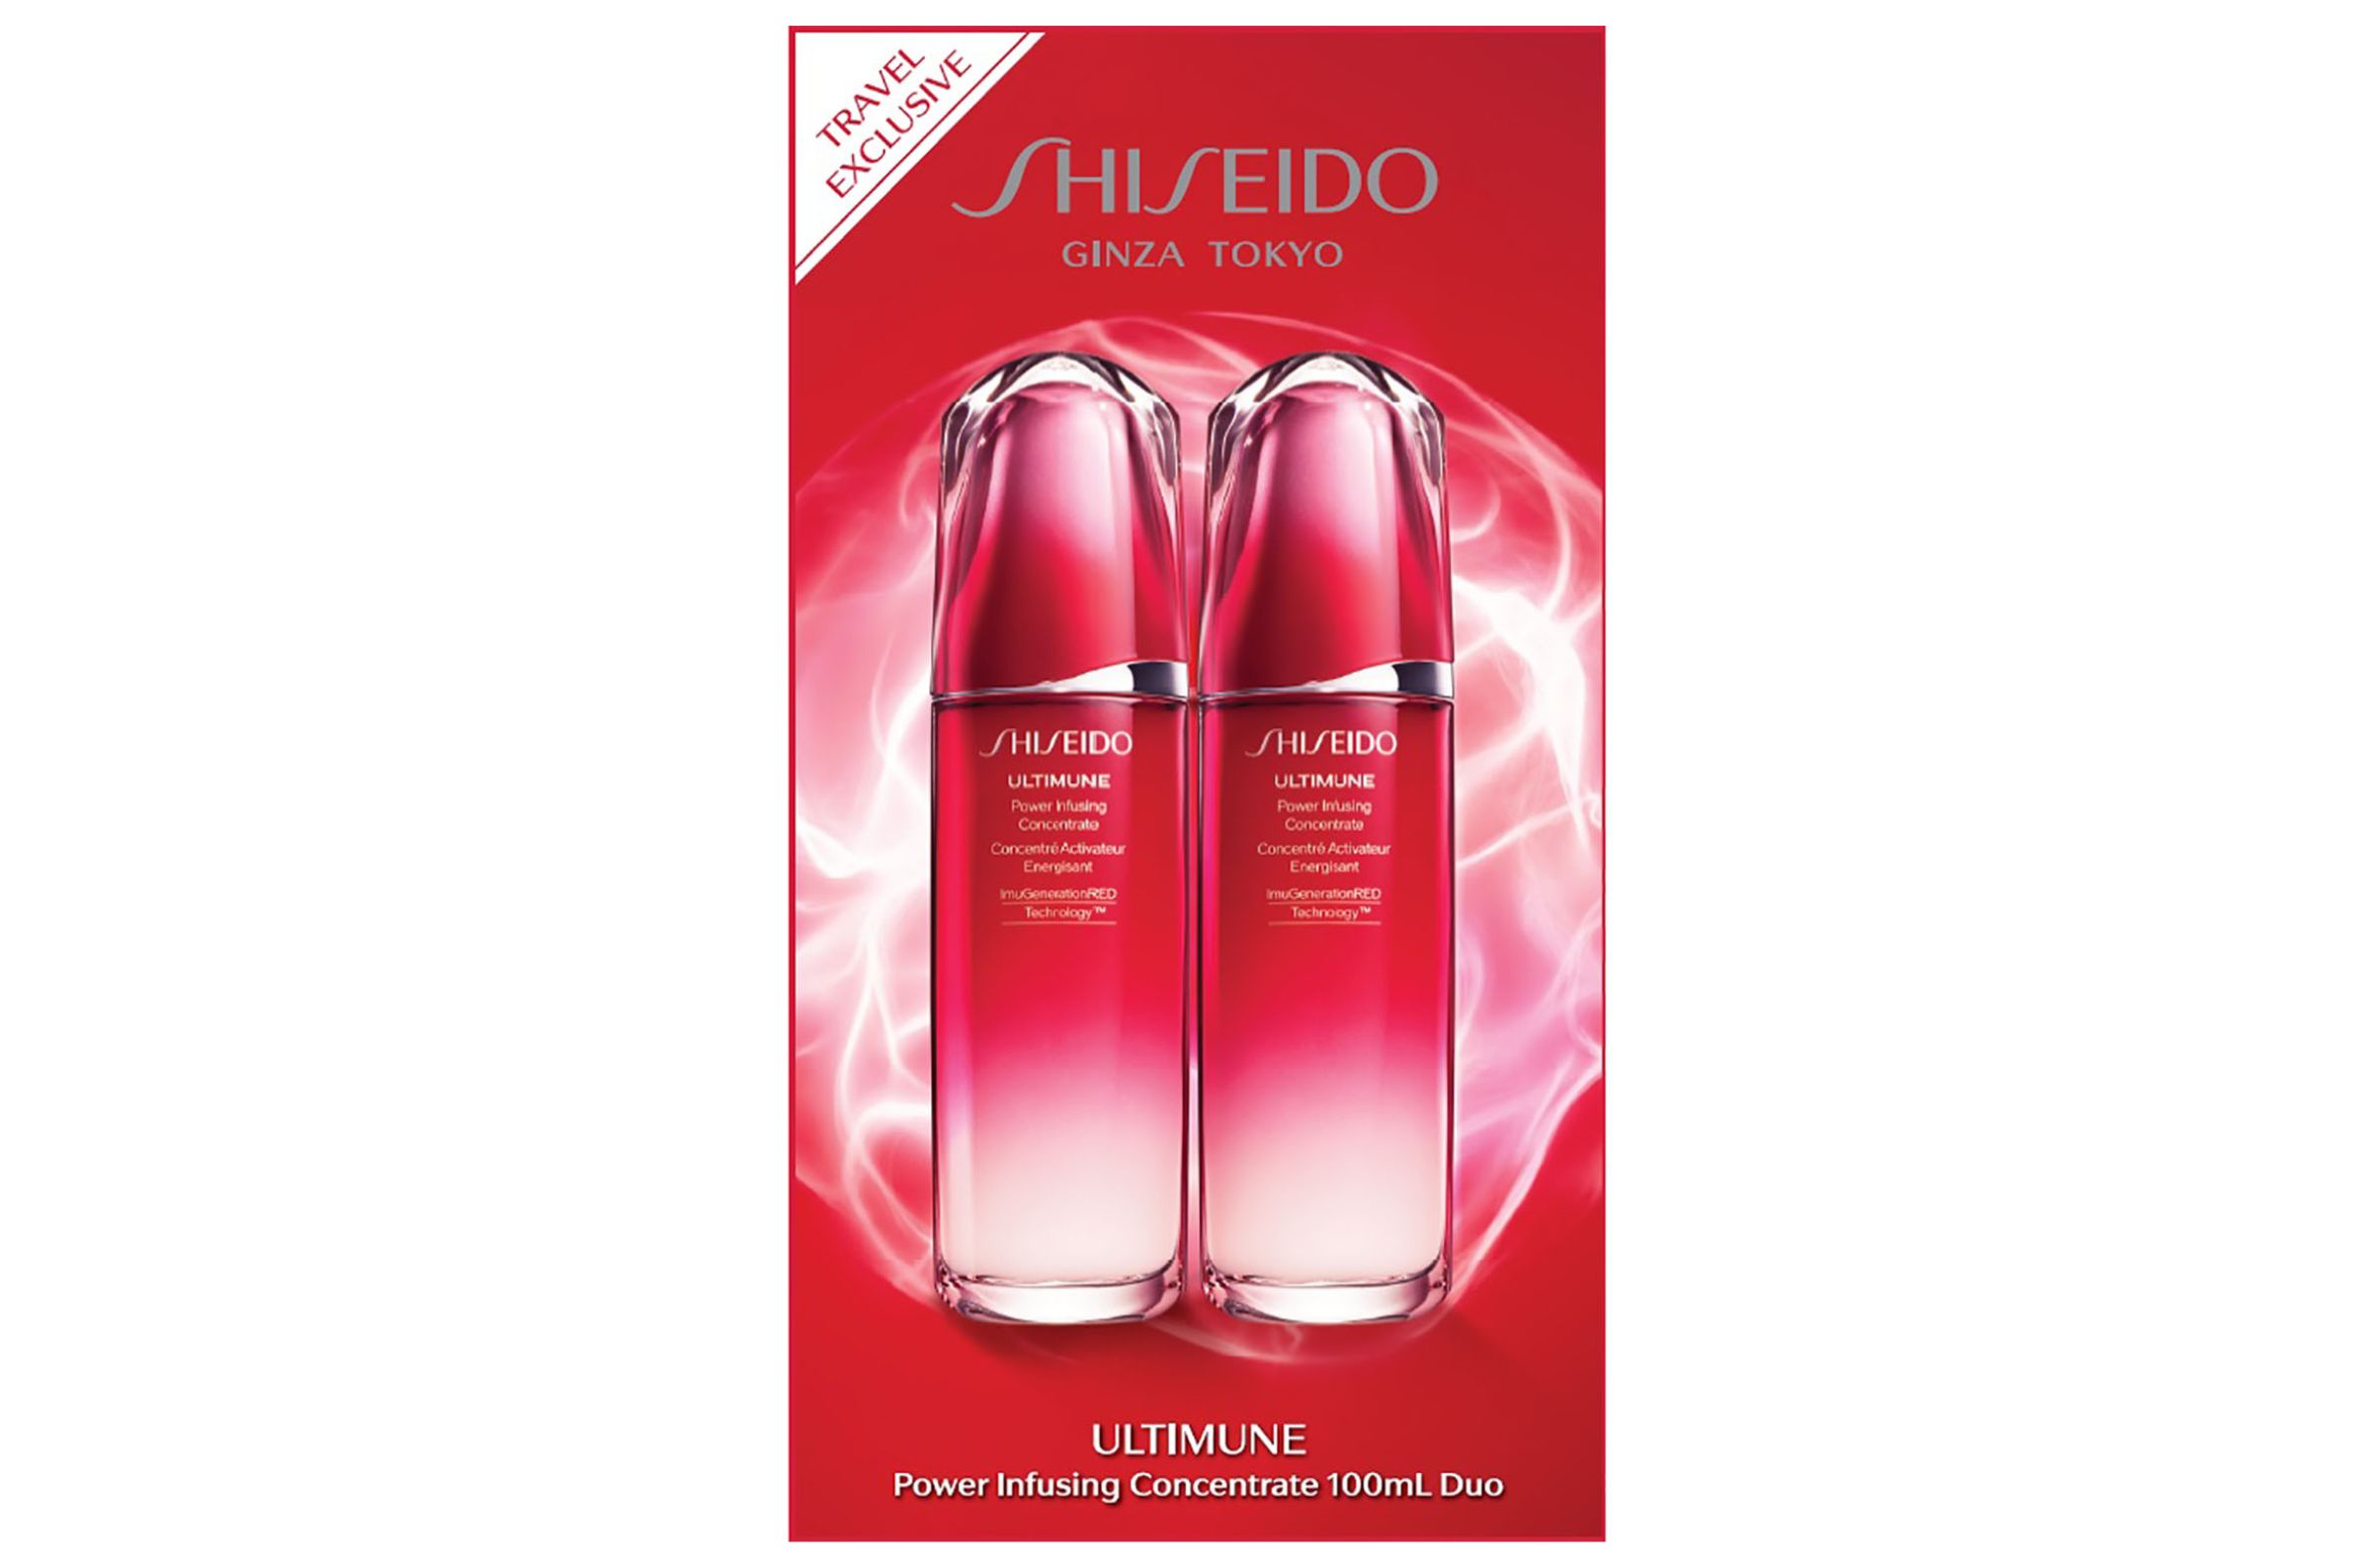 ULTIMUNE Power Infusing Concentrate III